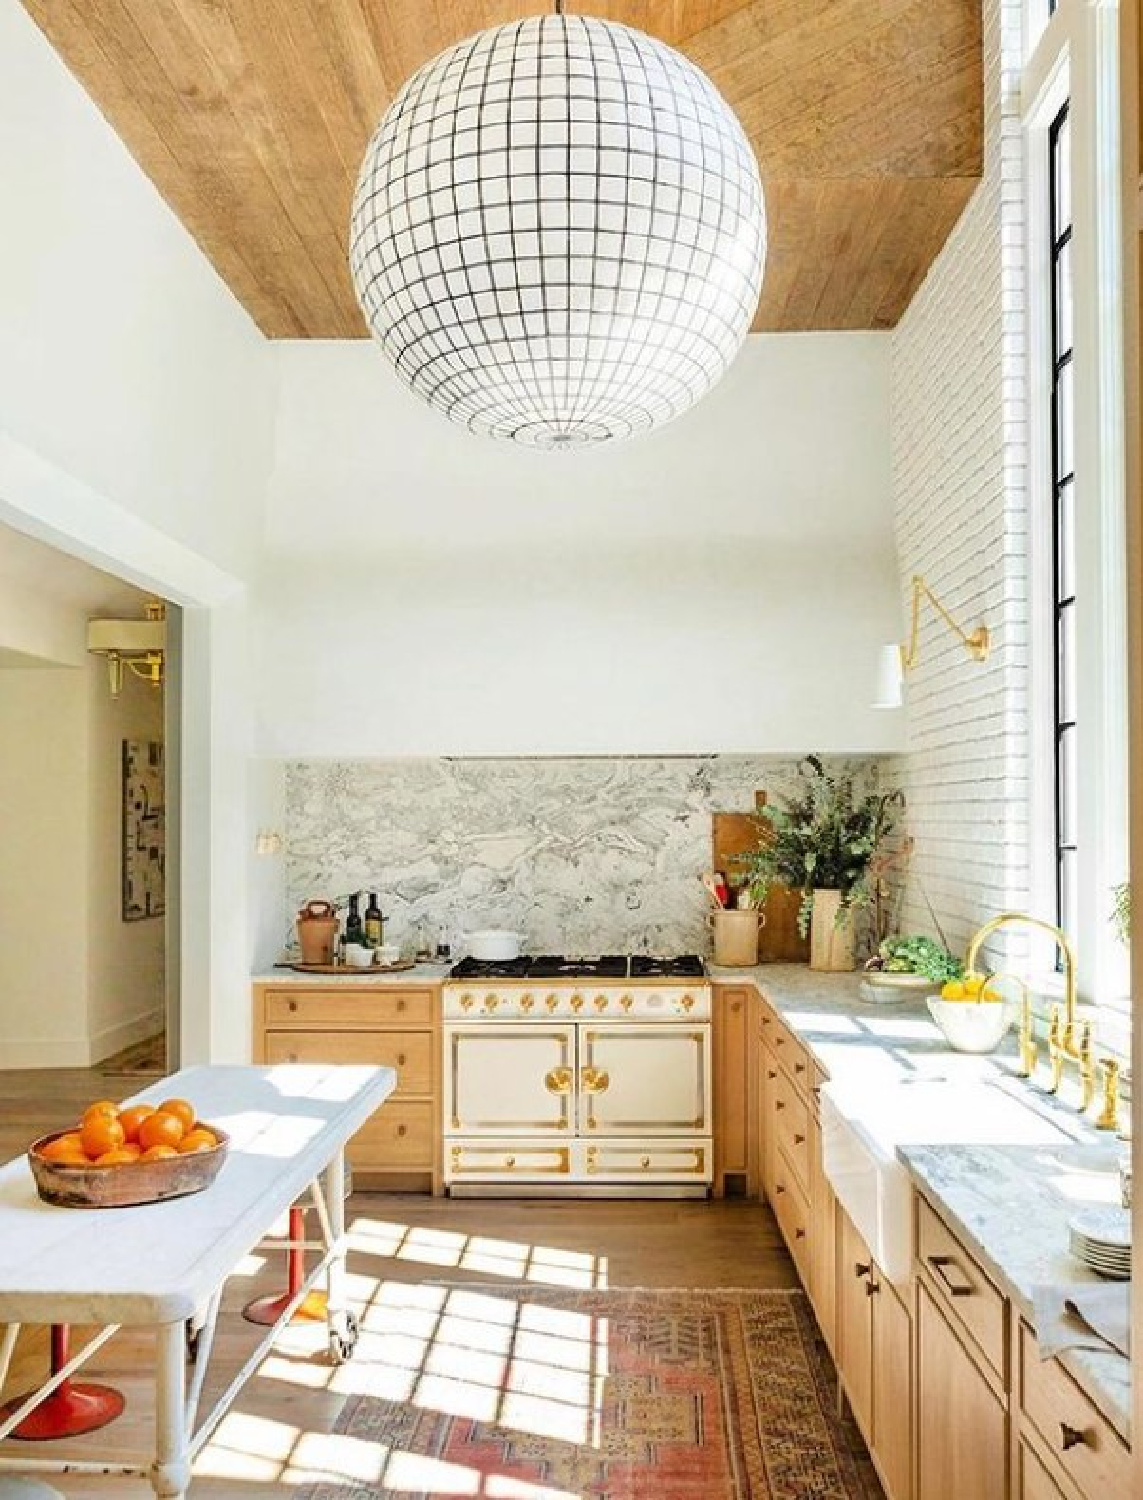 Lofty ceiling in a timeless European inspired kitchen with architecture by Jeffrey Dungan and interior design by Robin Rains - MILIEU.